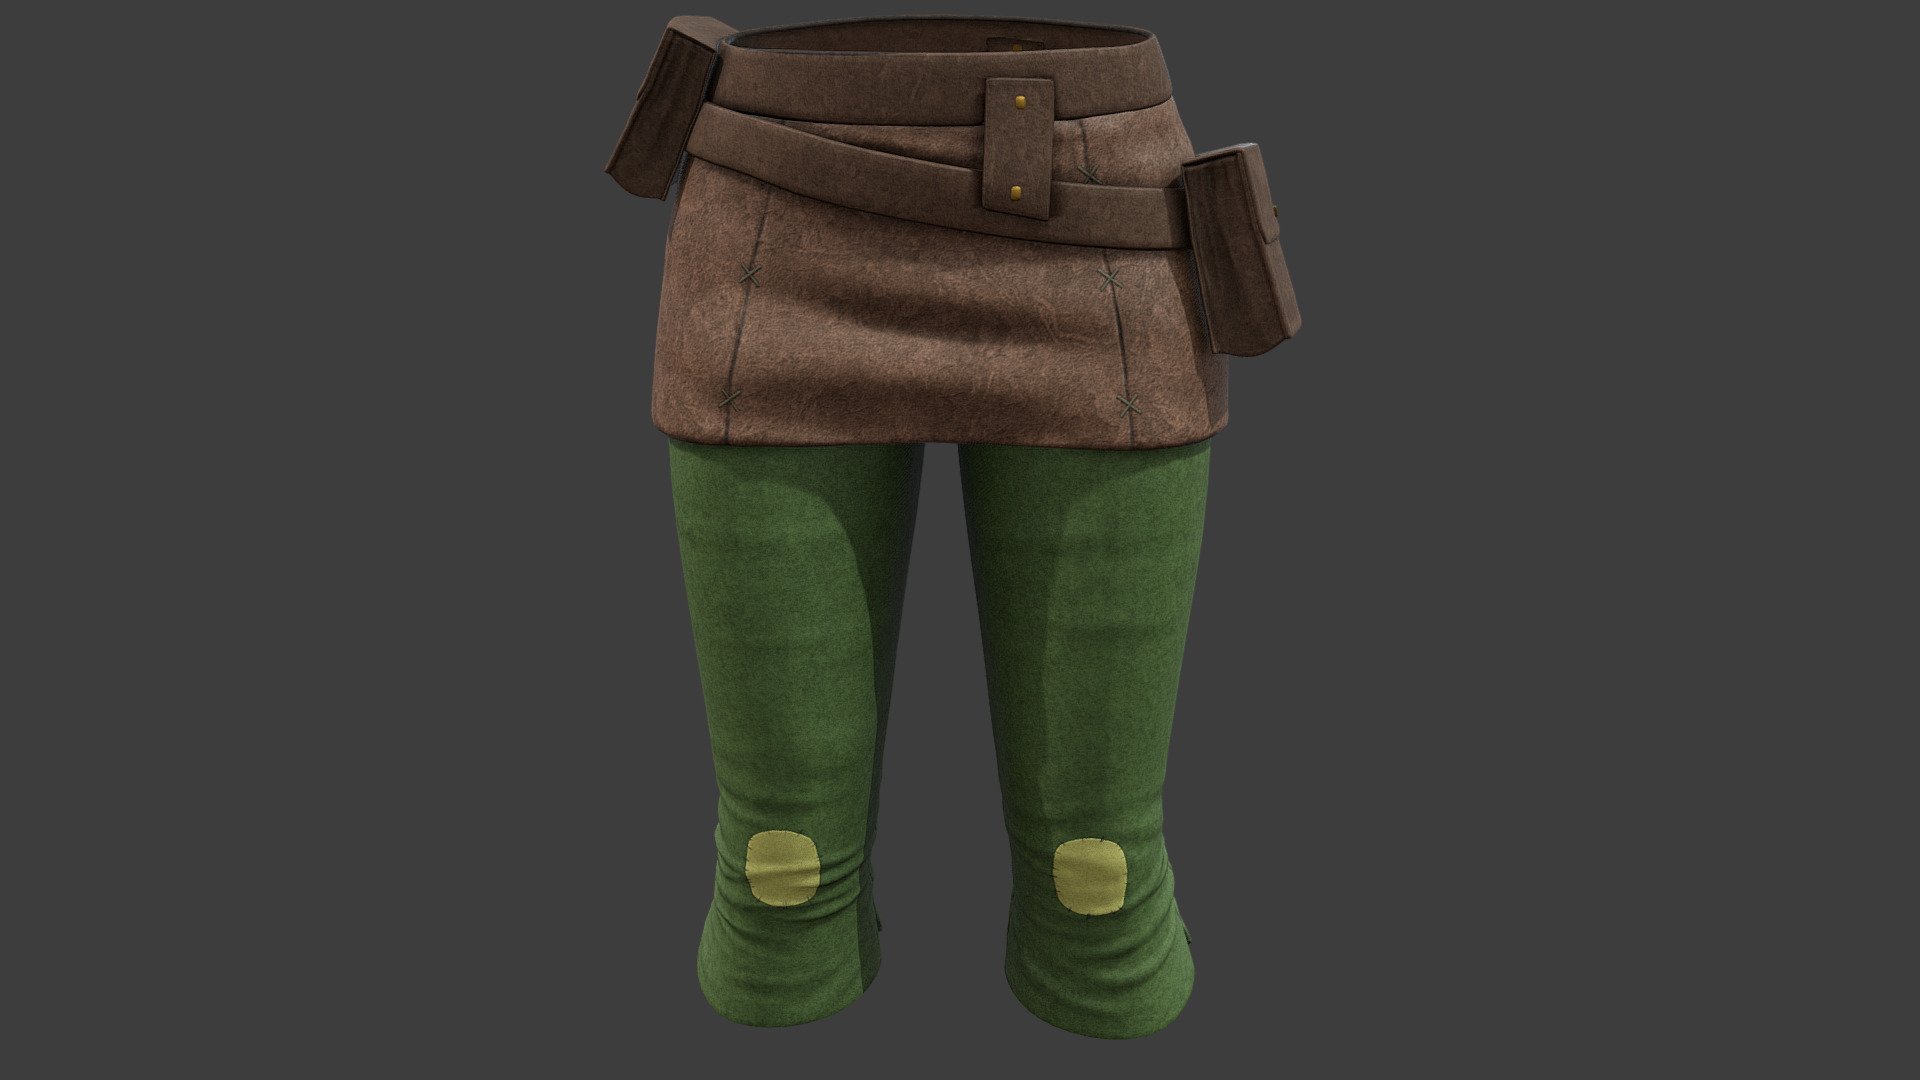 Female Medieval Steampunk Pheasant Pants With Utility Belt

Can be fitted to any character

Clean topology

No overlapping smart optimized unwrapped UVs

High-quality realistic textures

FBX, OBJ, gITF, USDZ (request other formats)

PBR or Classic

Type     user:3dia &ldquo;search term